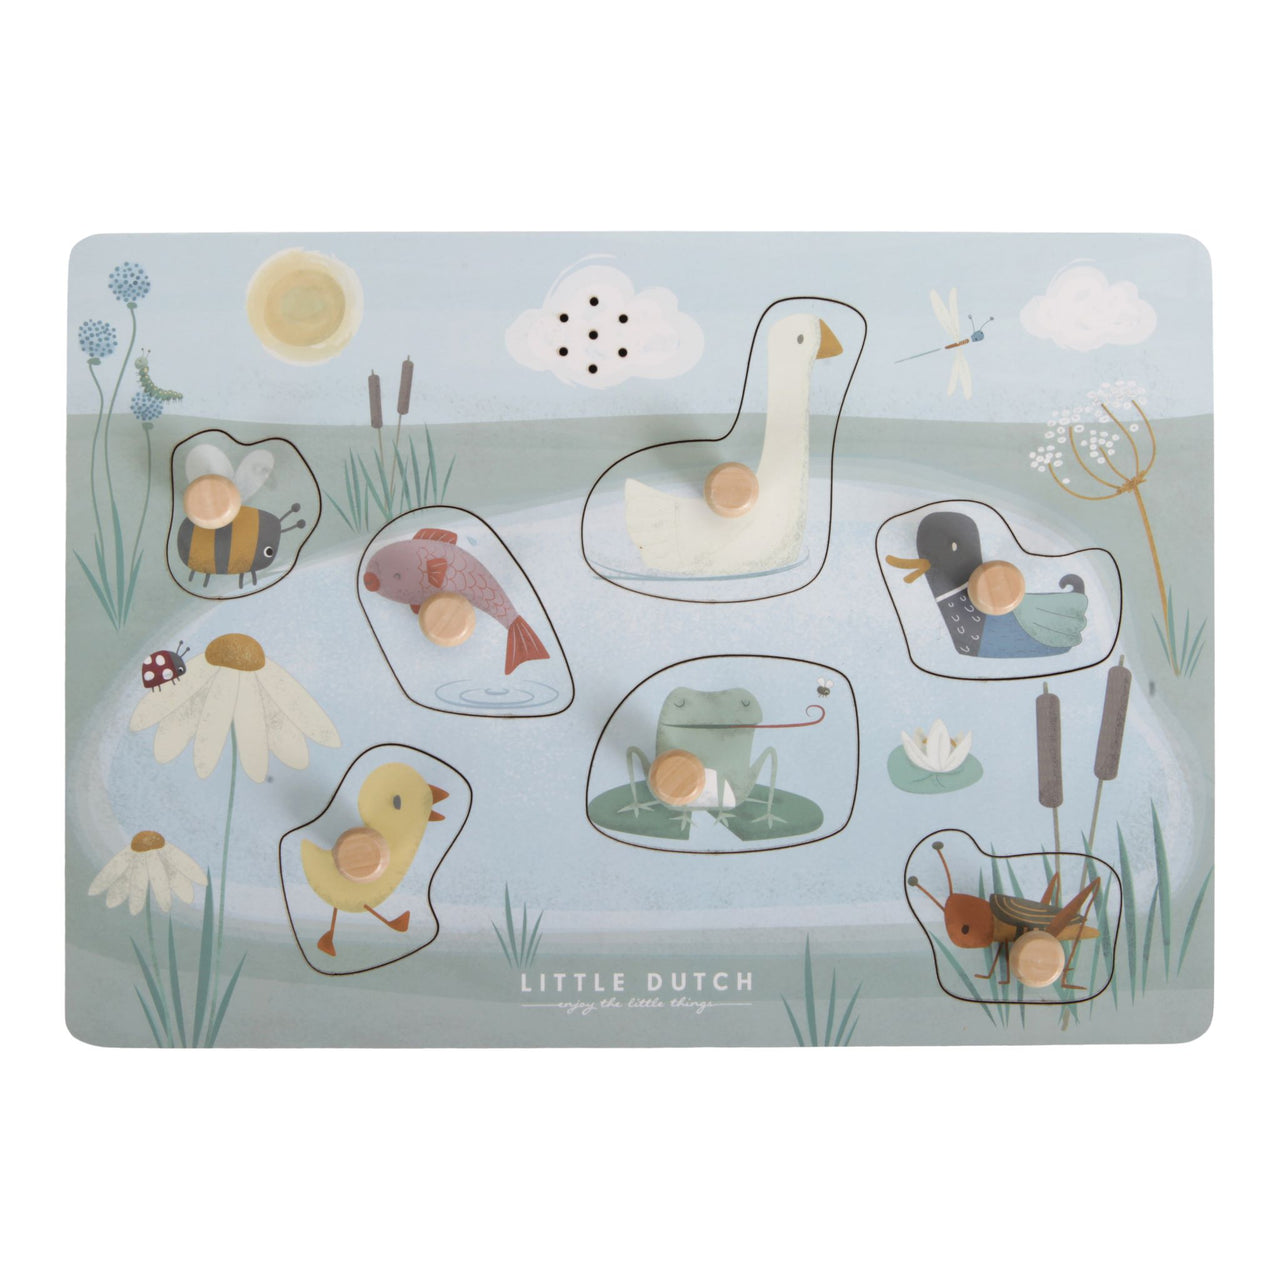 Meet Goose and his friends, recognize their shapes and learn their individual sounds with this lovely sound puzzle. Put the animal correctly in the puzzle board and listen to its splash, croak or buzz.Designed for your child to explore the living creatures around the pond in the countryside.This lovely puzzle with 7 animals and sounds stimulates coordination and vocabulary.